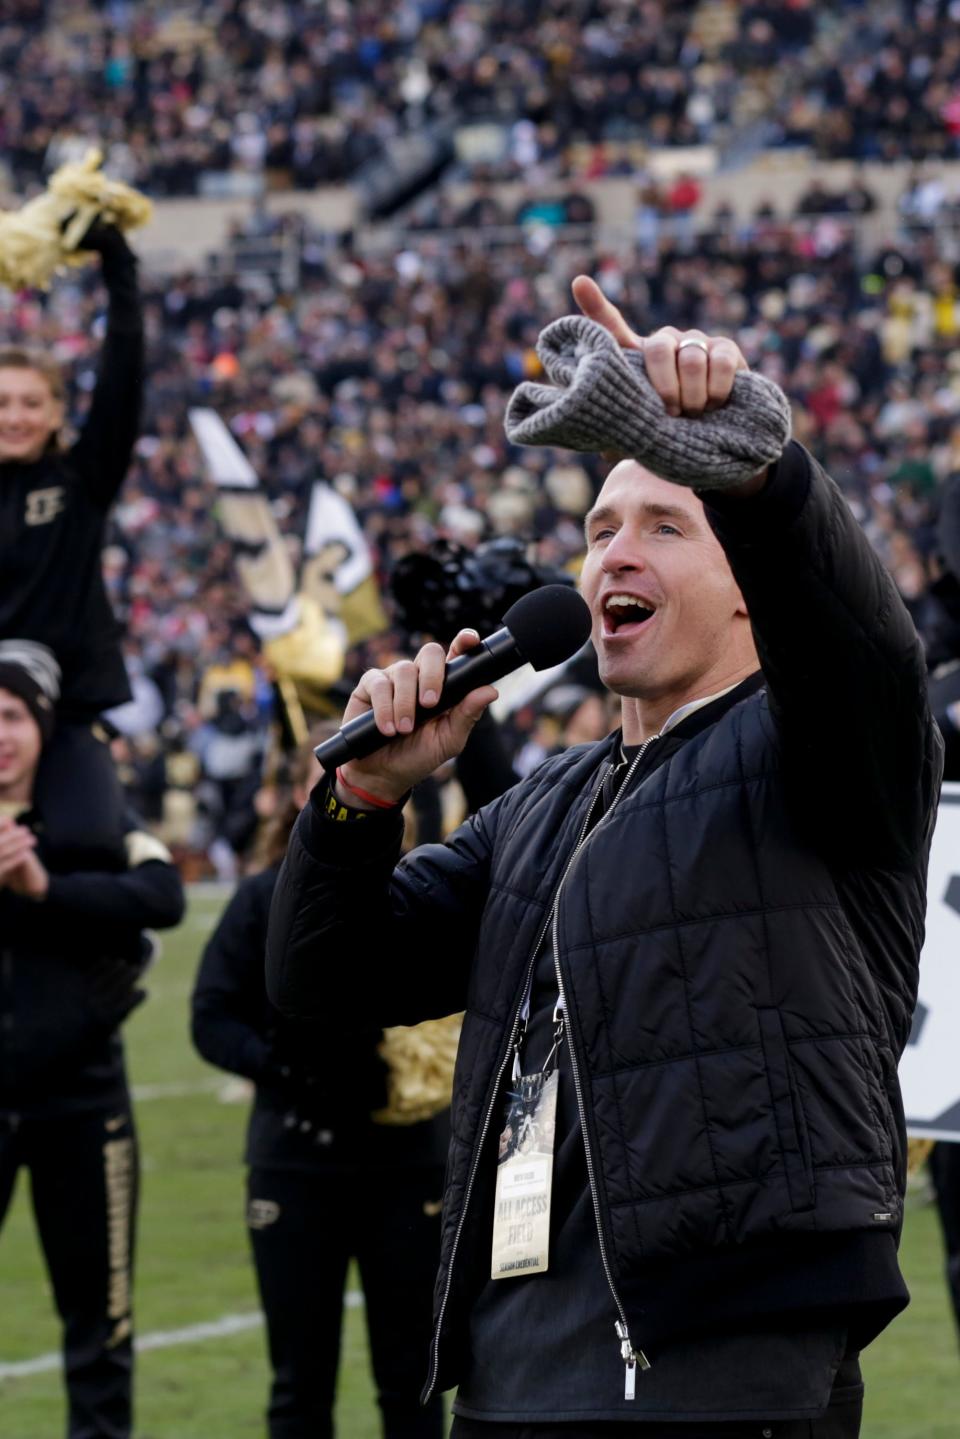 Purdue alumn and NFL quarterback Drew Brees leads the fourth quarter "Shout", Saturday, Nov. 2, 2019 at Ross-Ade Stadium in West Lafayette.